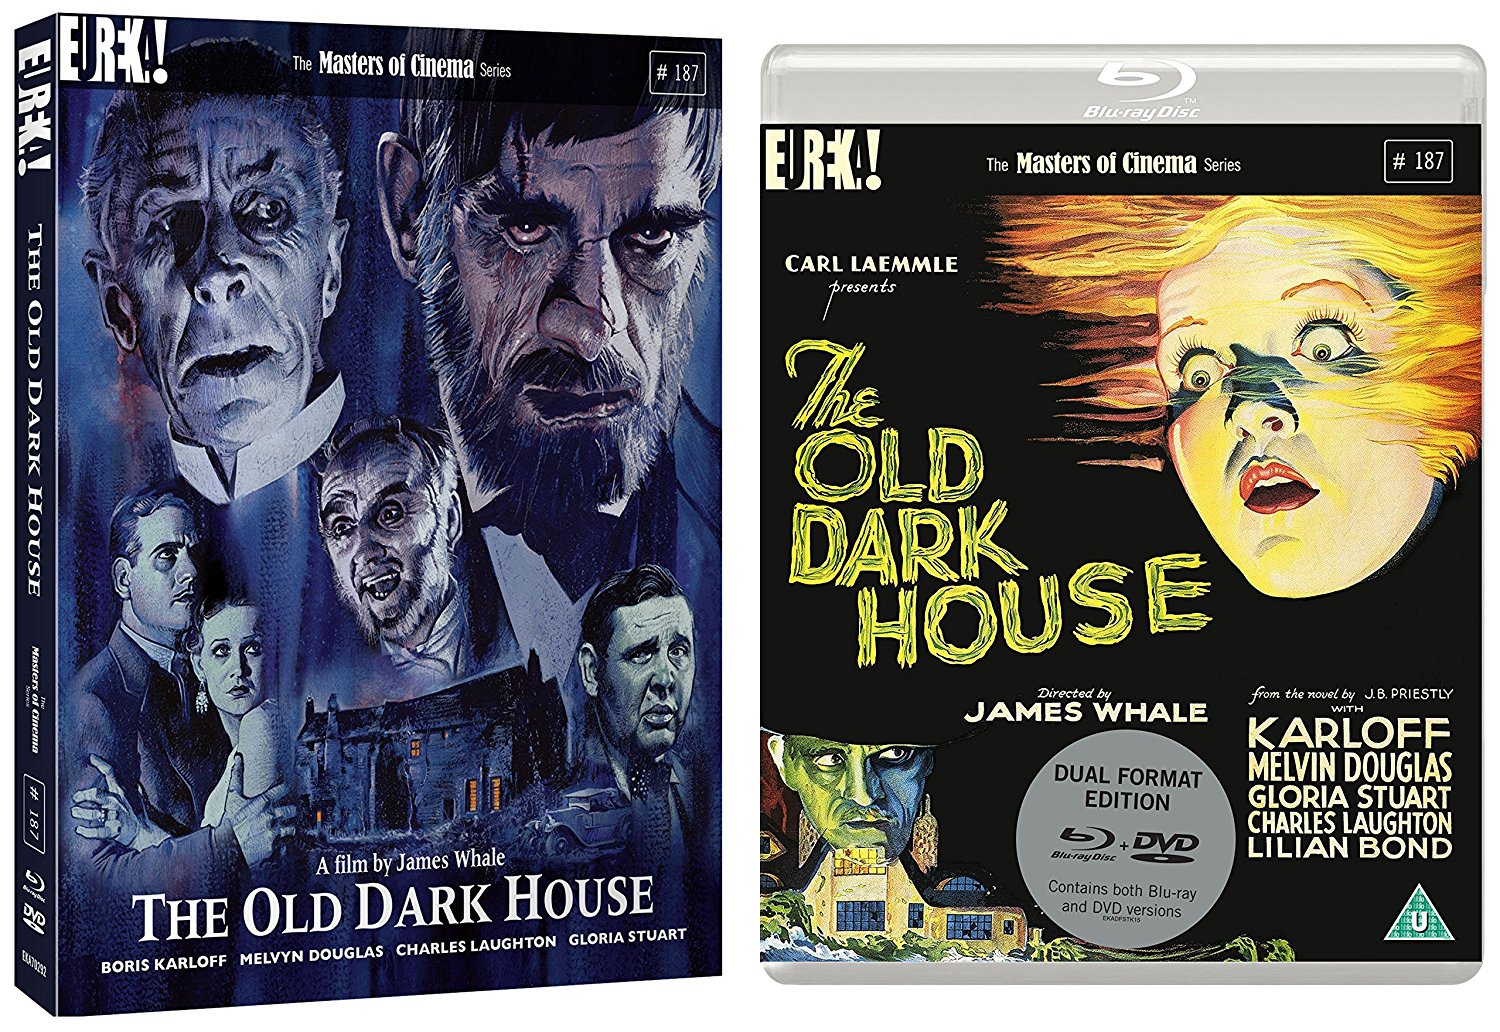 The Old Dark House Blu-ray review: James Whale’s Gothic horror restored